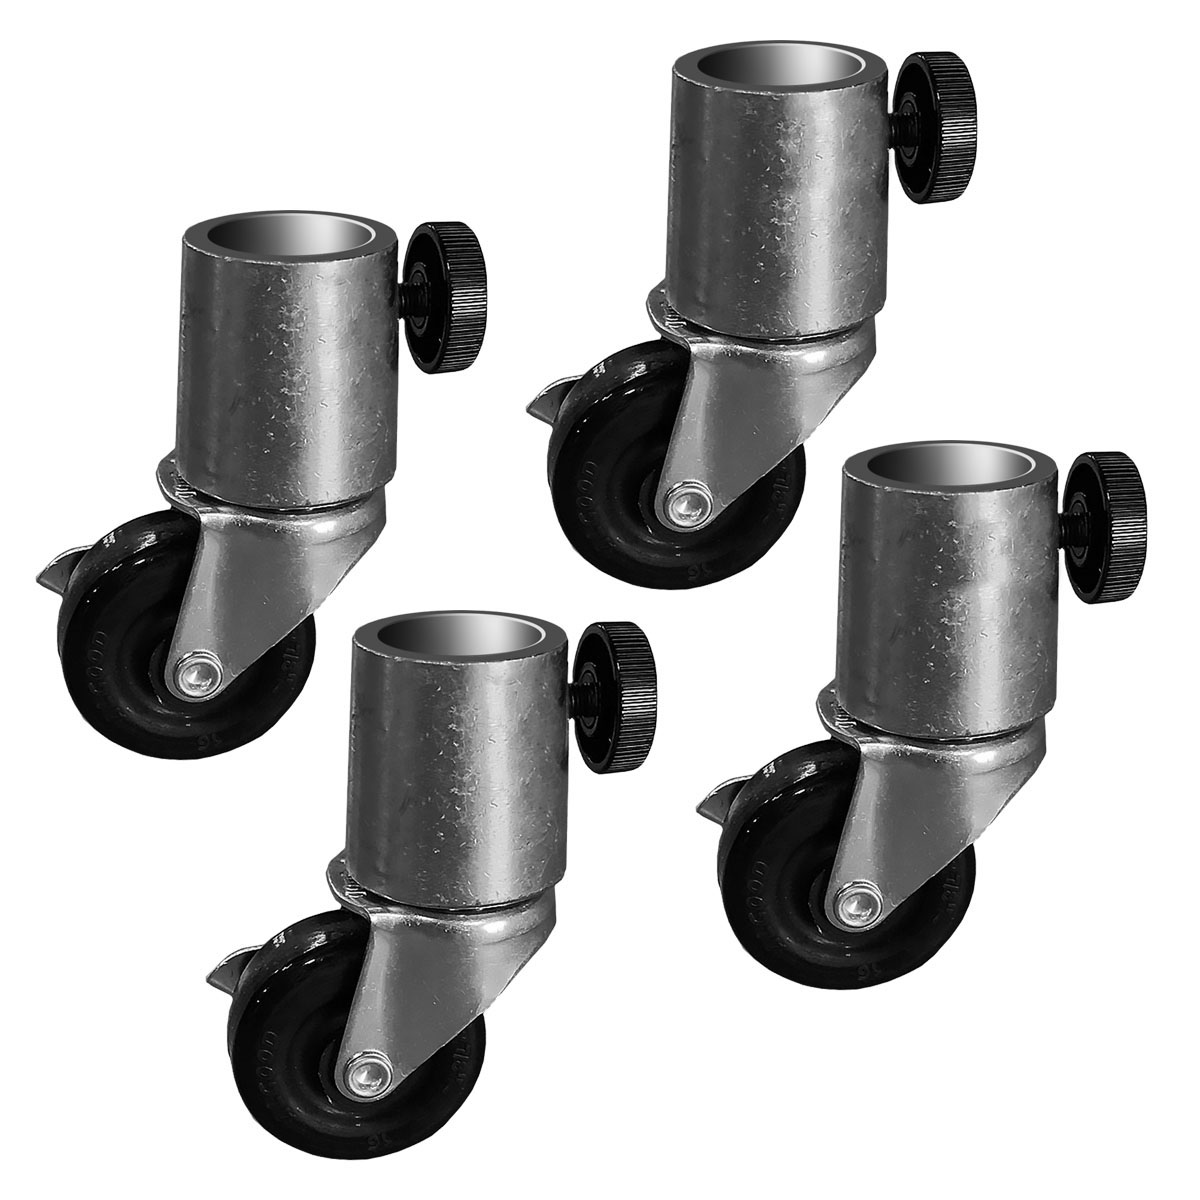 Wheels Locking For Tables Set Of 4